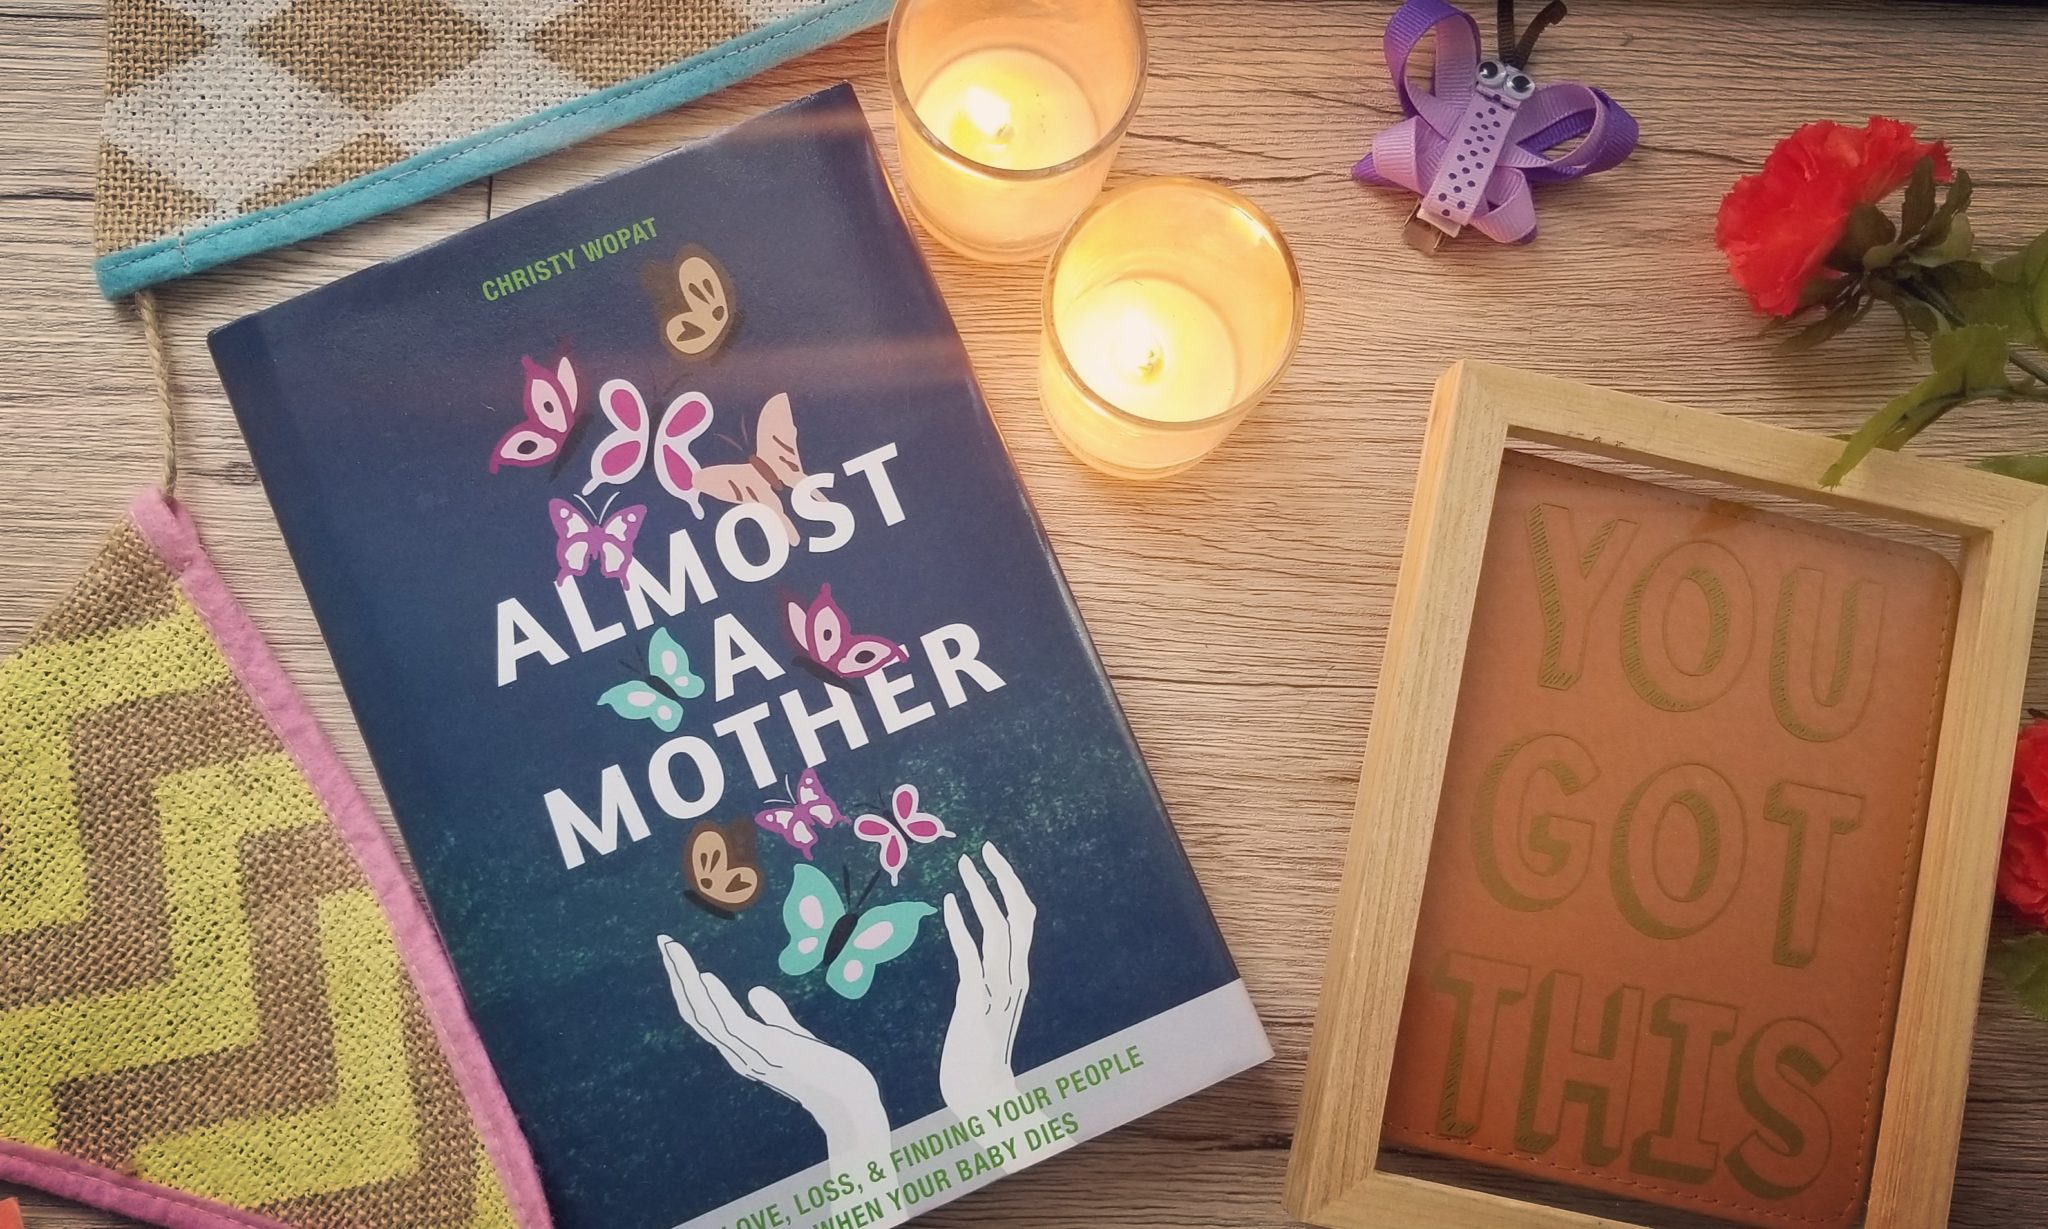 Christy Wopat, author of Almost a Mother: Love, Loss, and Finding Your People When Your Baby Dies